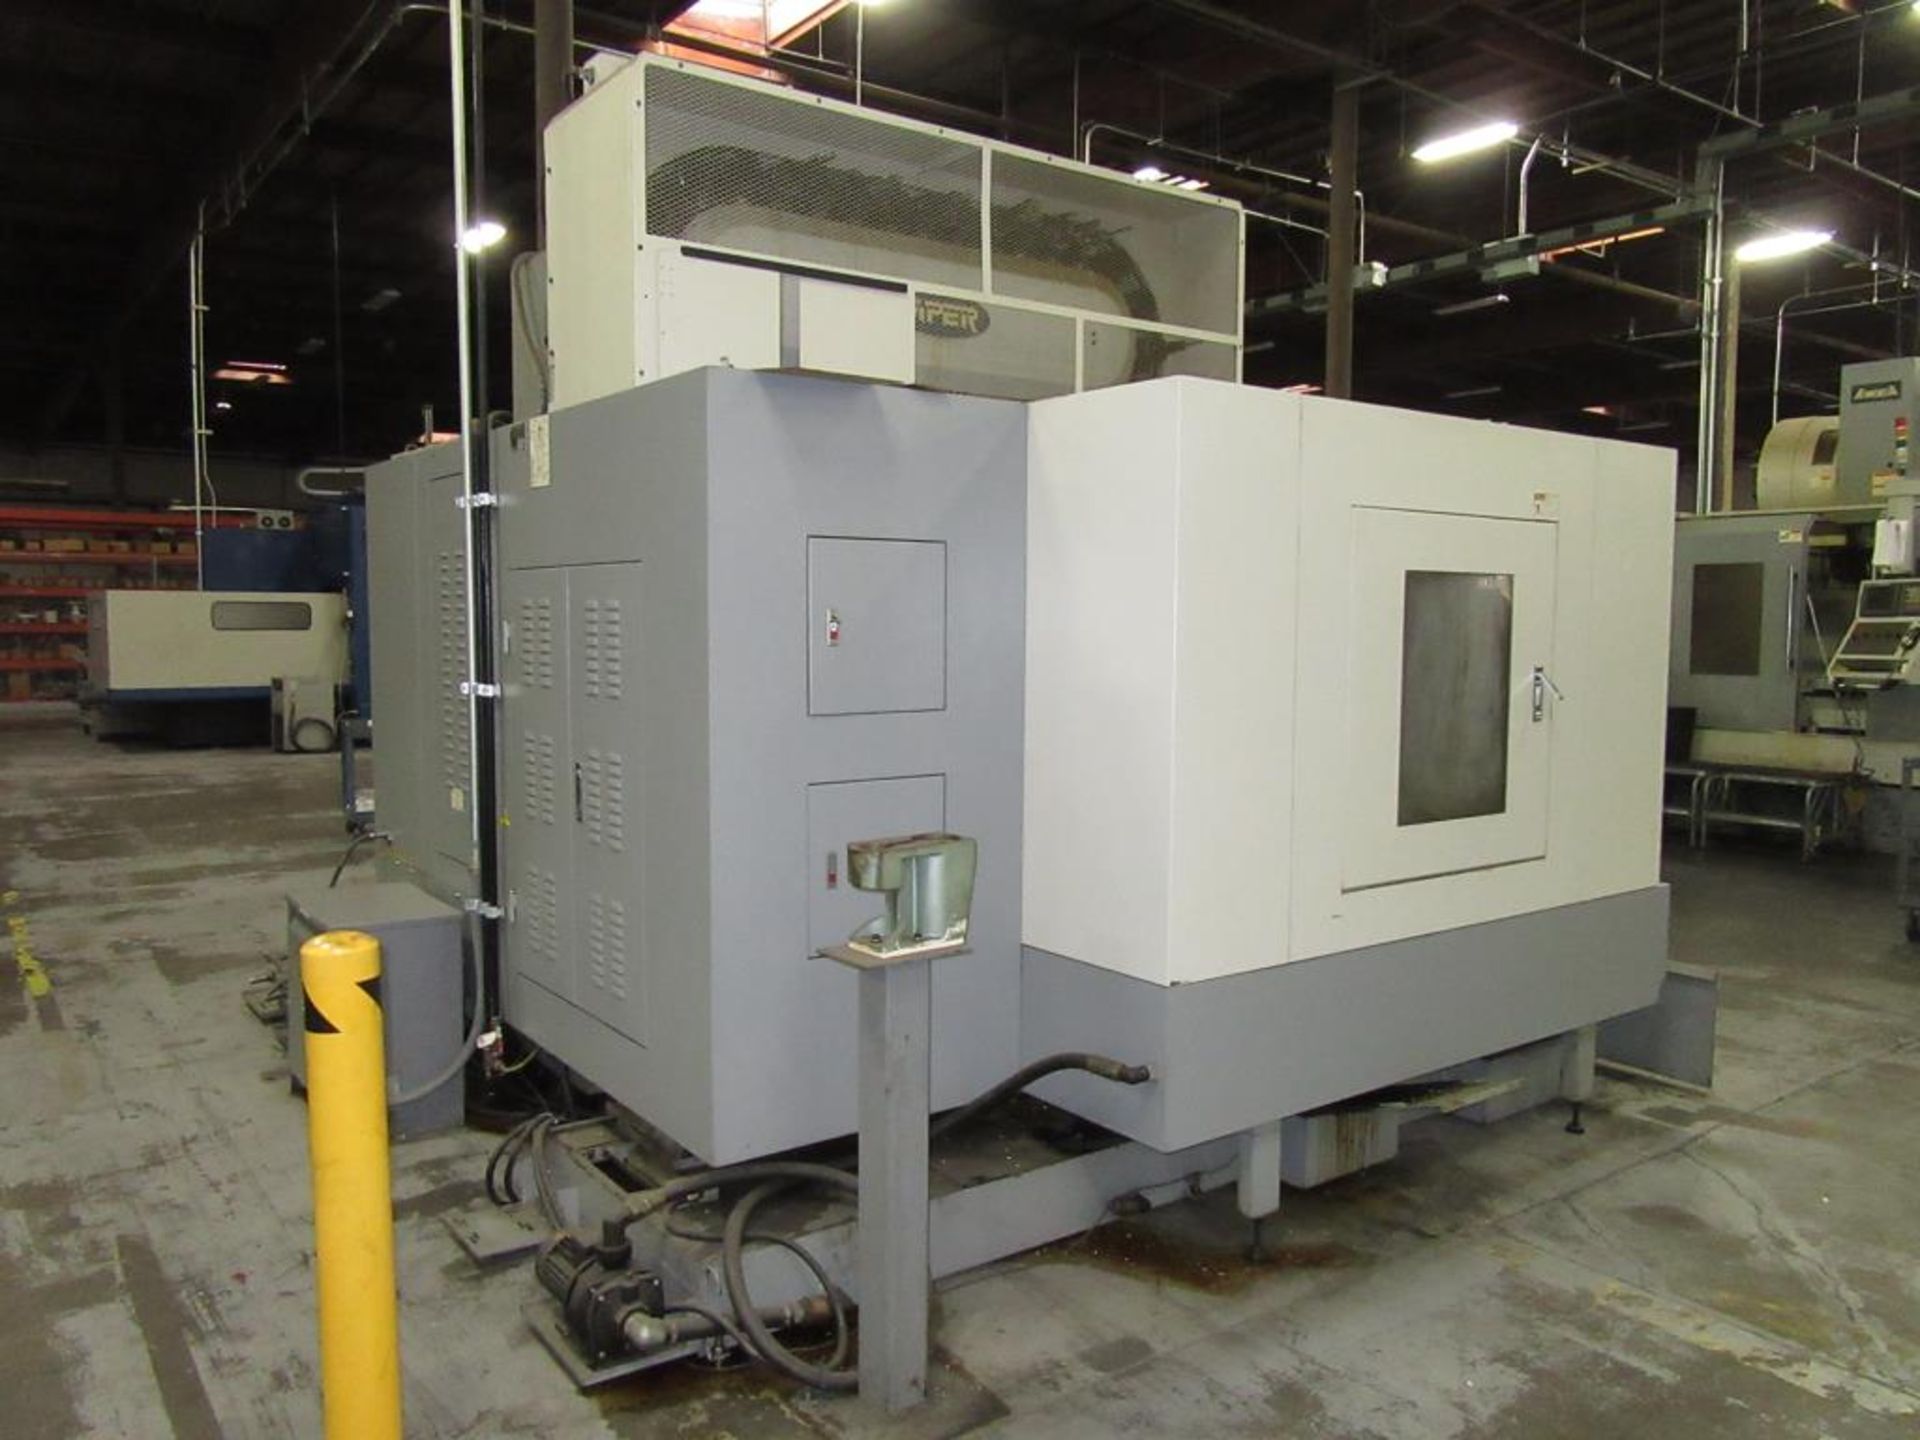 Mighty Viper VMC-1600A. 2006 - CNC Vertical Machining Center with Fanuc 21i-MB 3-Axis Control Panel, - Image 20 of 22